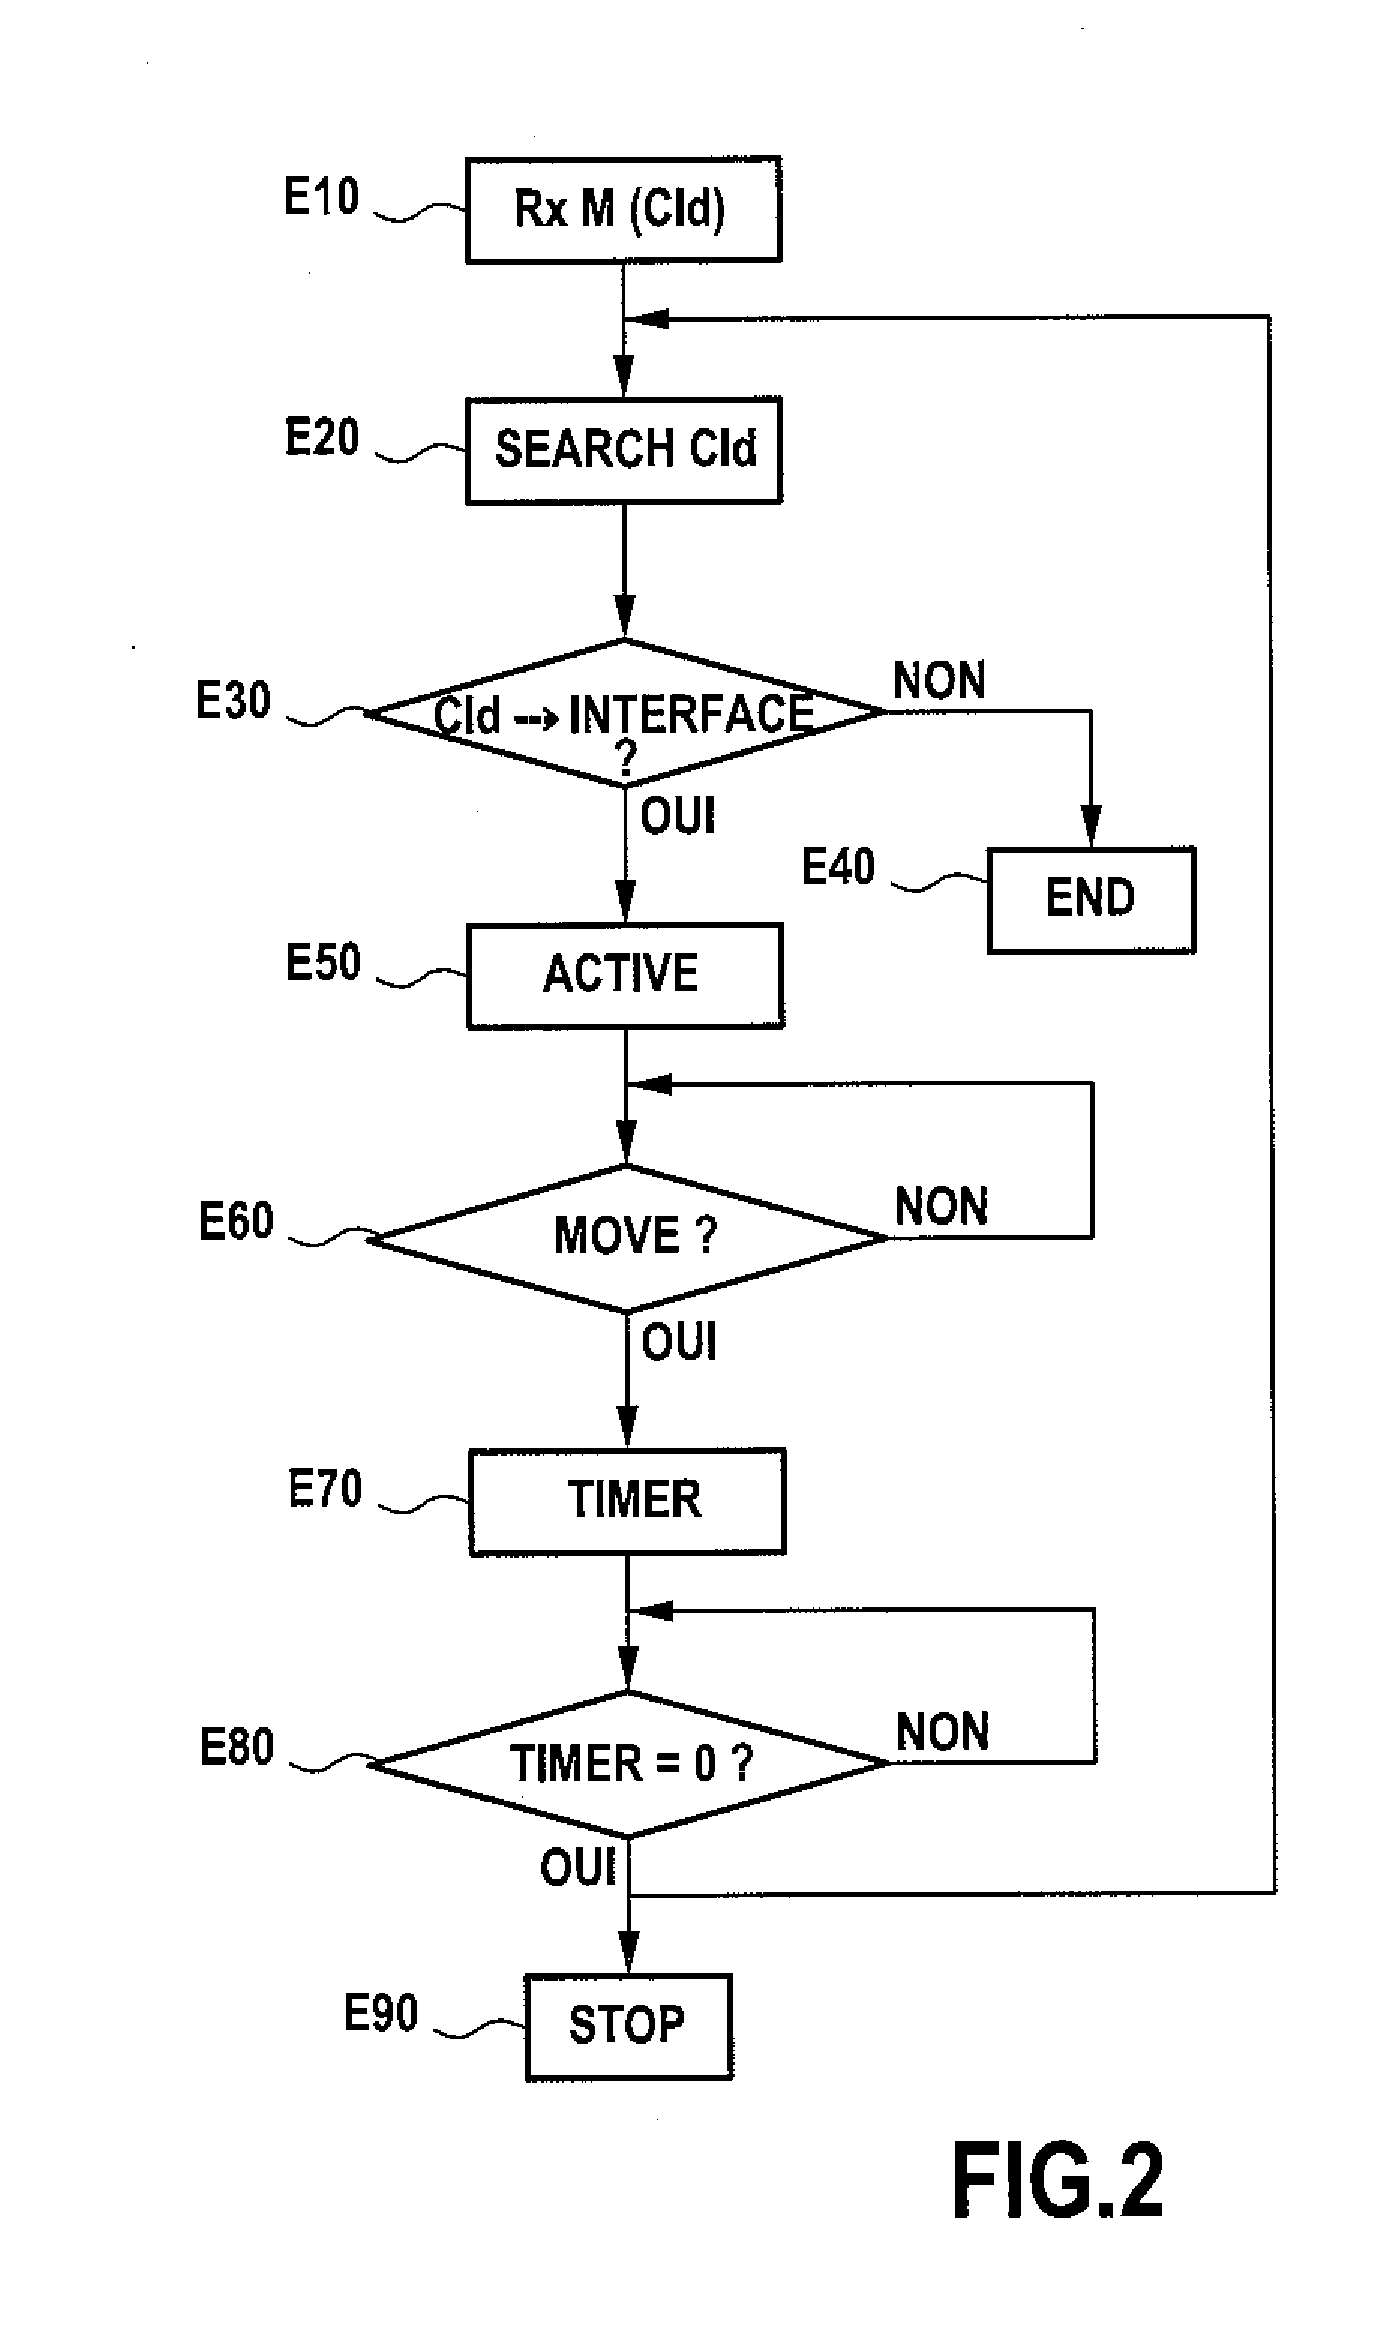 Management of a Wireless Communication Interface of a Terminal